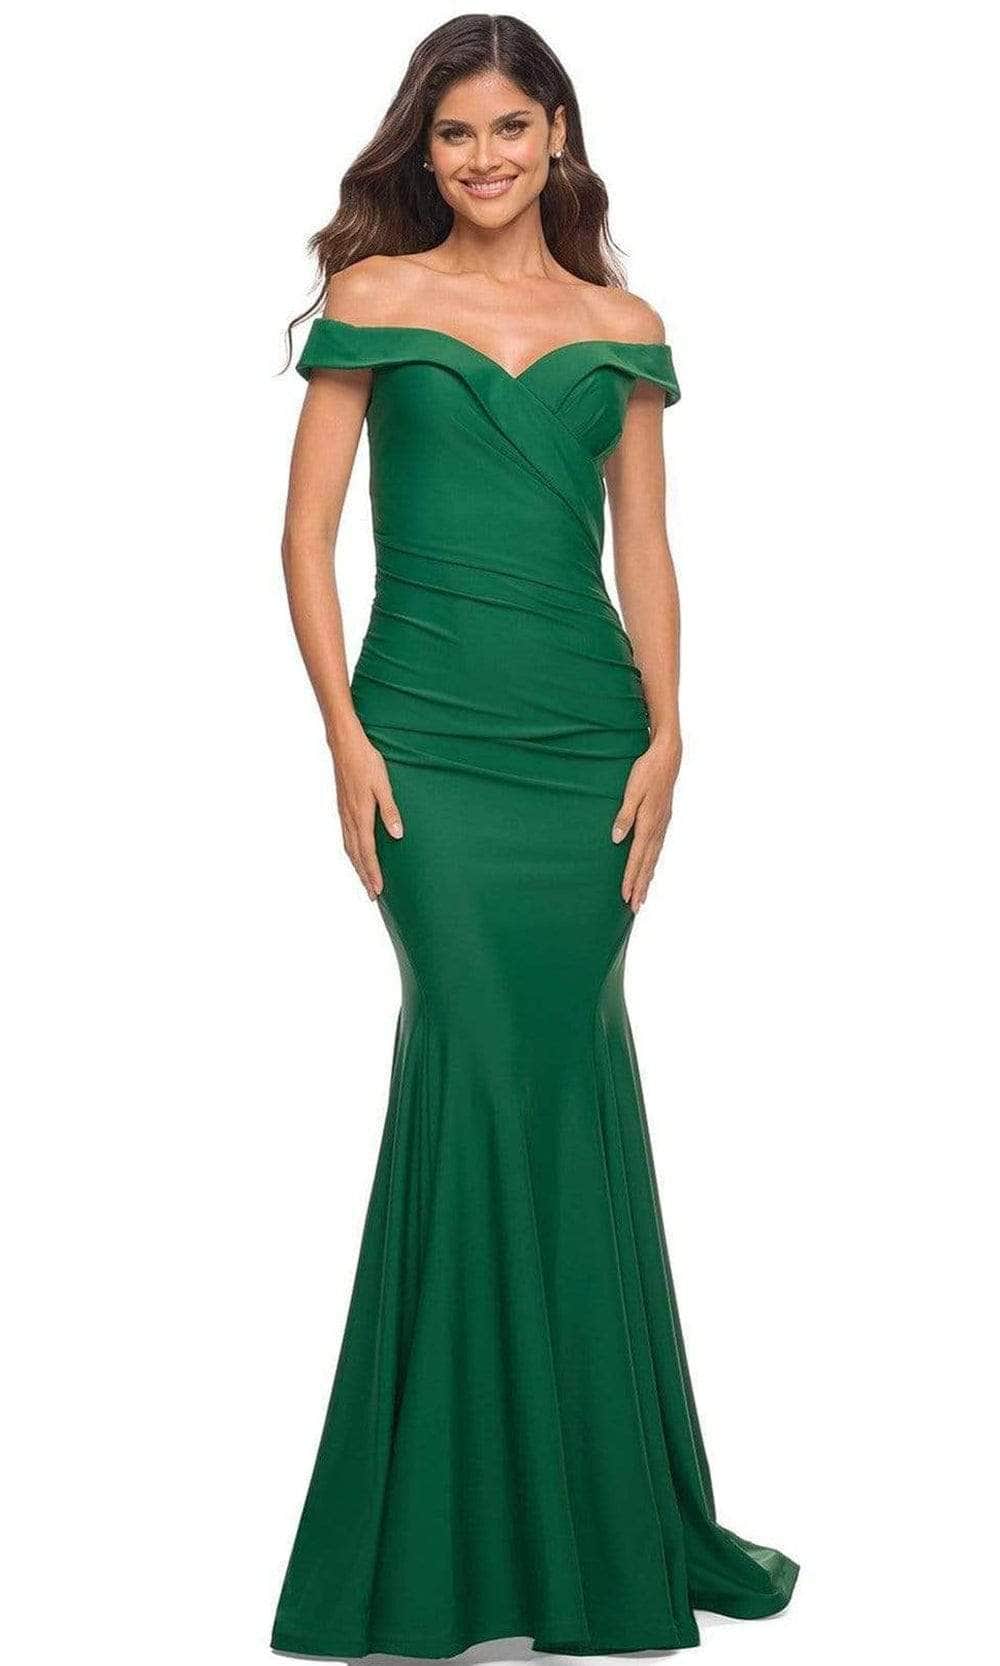 La Femme - Off Shoulder Mermaid Prom Gown 30736SC - 1 pc Emerald In Size 14 Available CCSALE 14 / Emerald